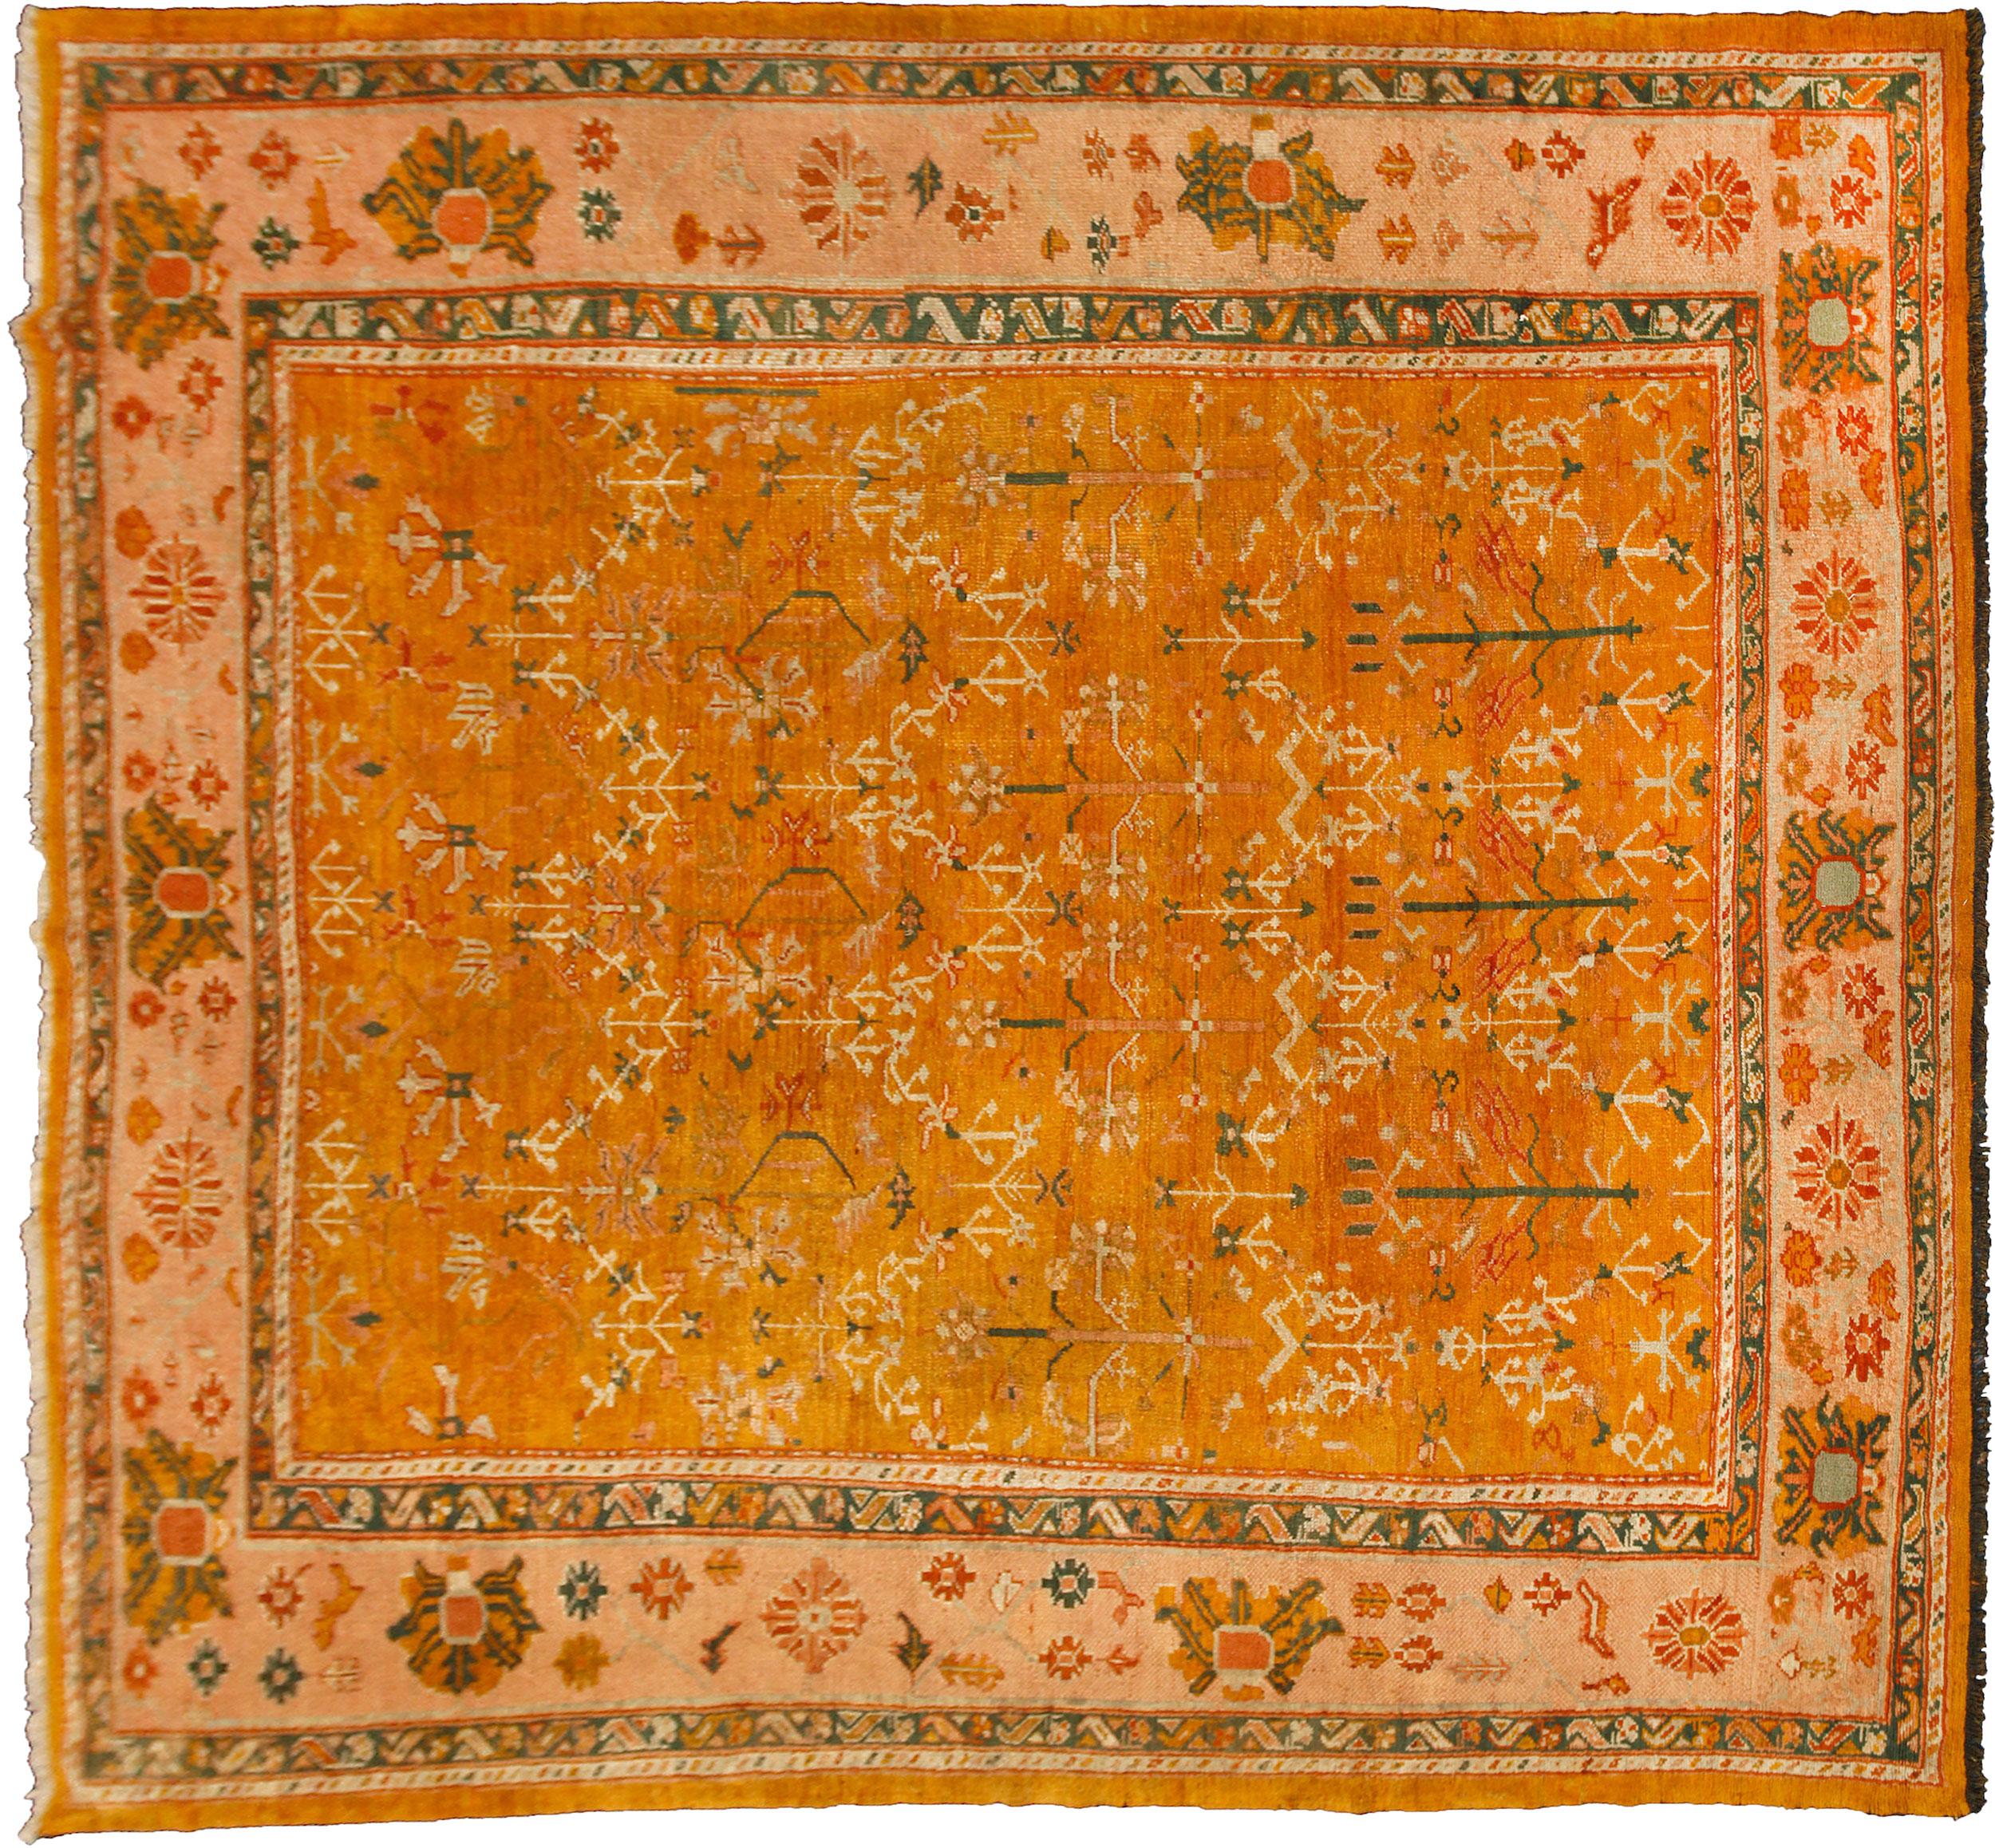 Rare antique Ushak carpet. It is very difficult to find Ushak in this square size. The beautiful yellow ground is decorated with an all over shrub motif with a light peach floral border, which makes this piece very decorative.
Size: 10x9 ft 315x287